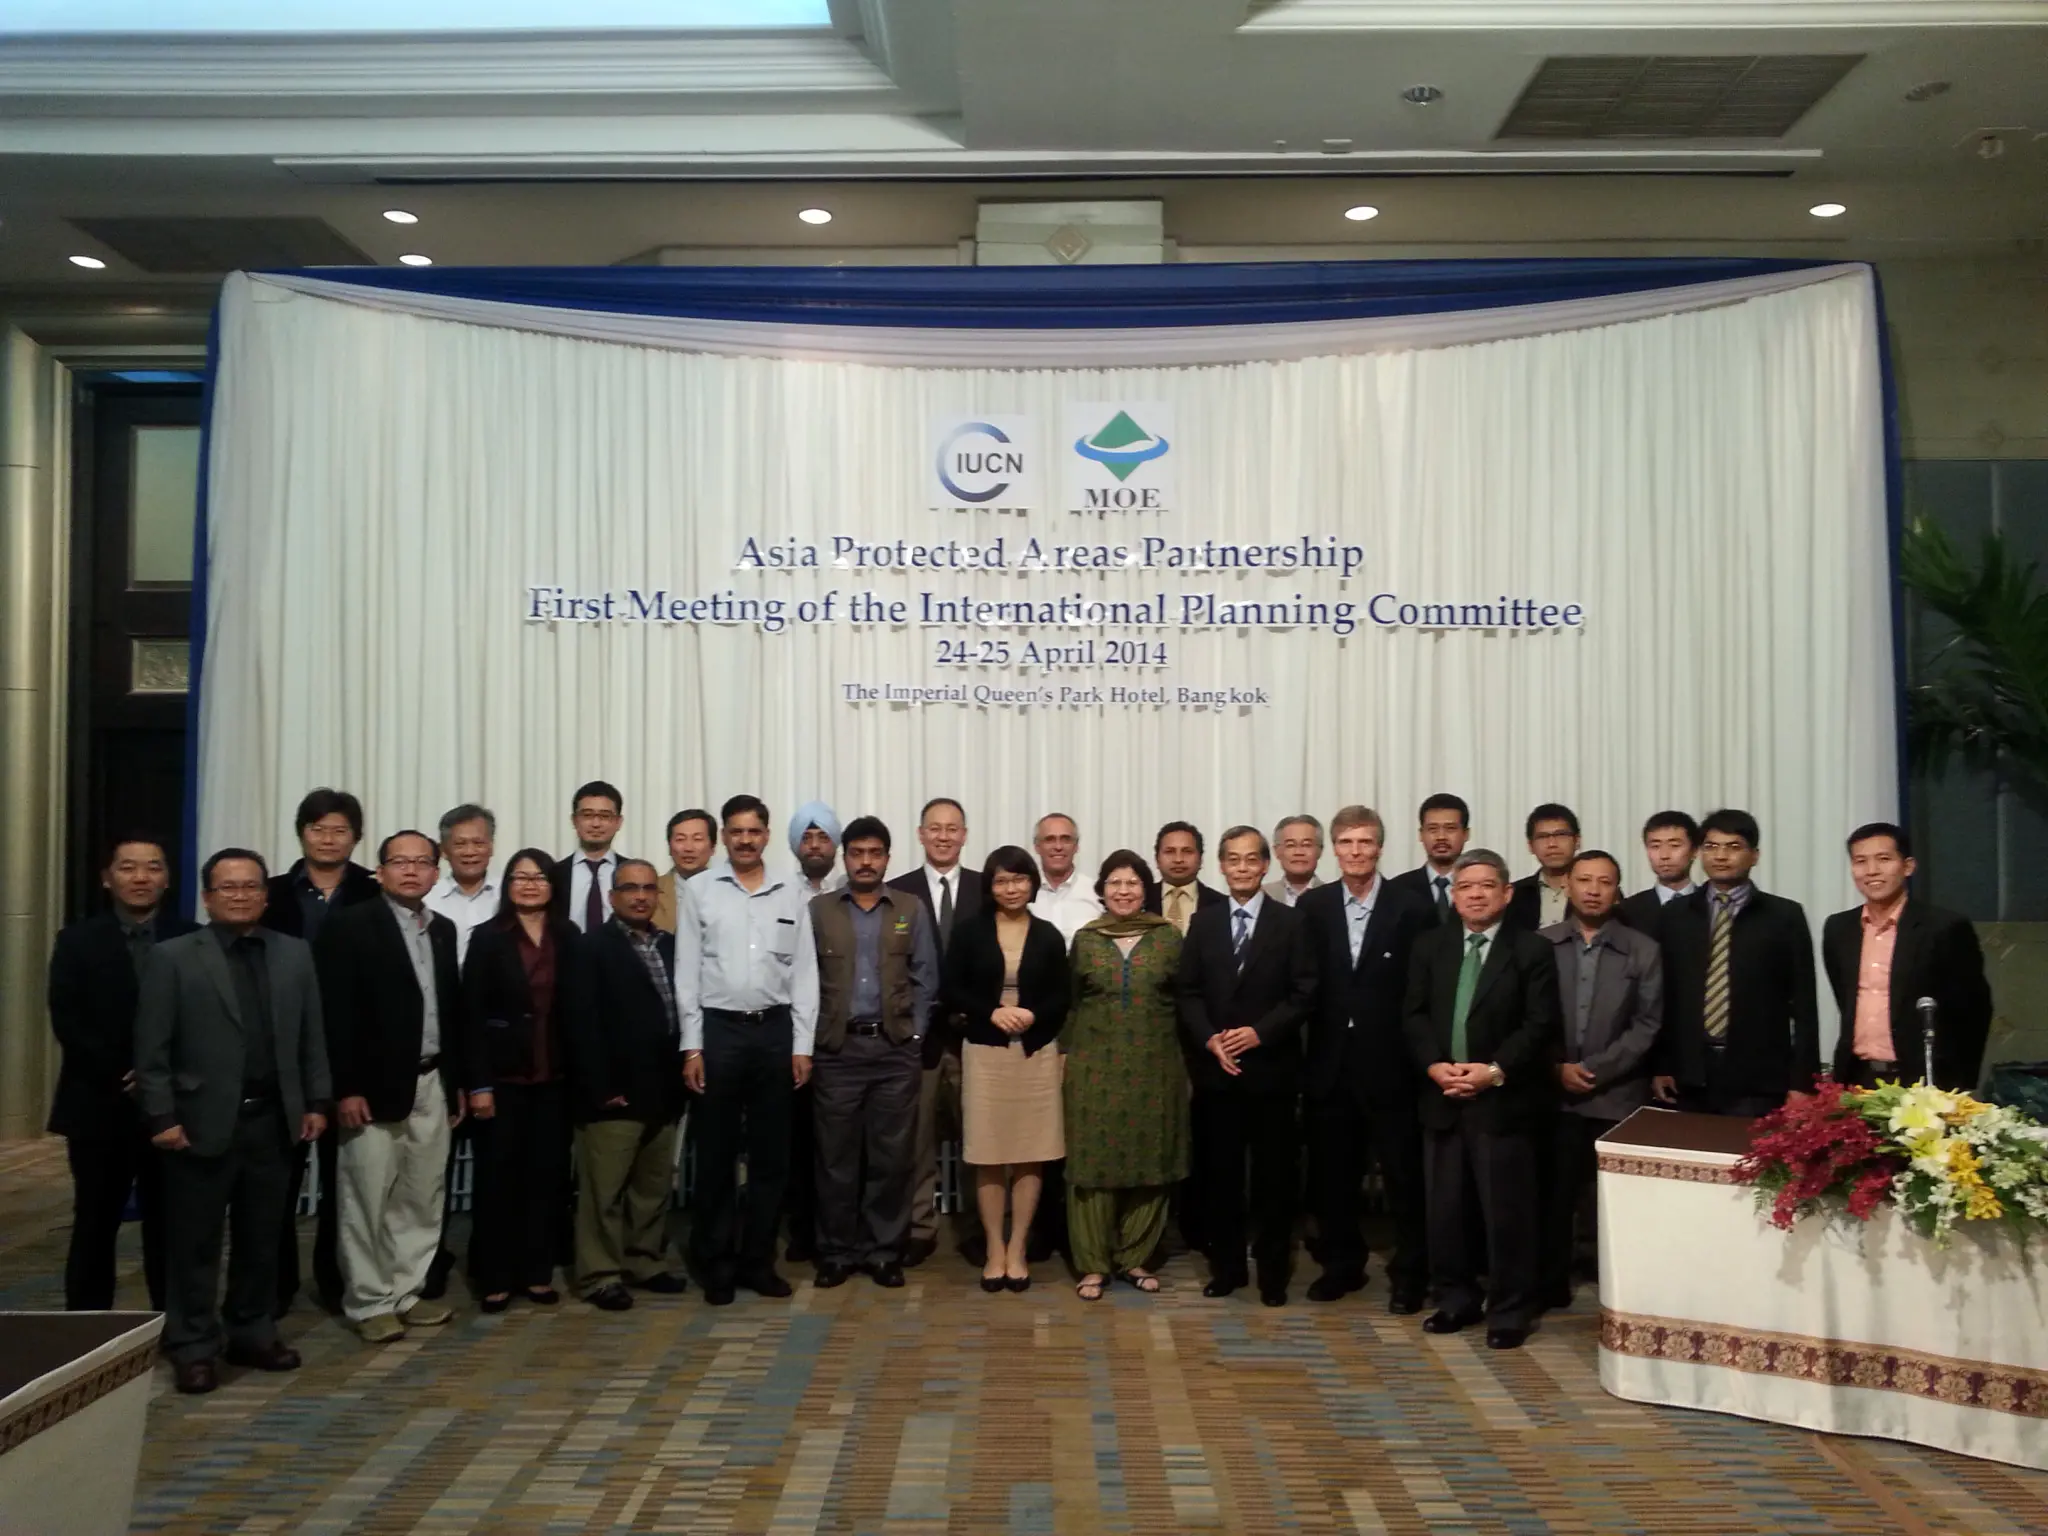 Participants of the first meeting of the international planning committee of the Asia Protected Areas Partnership.